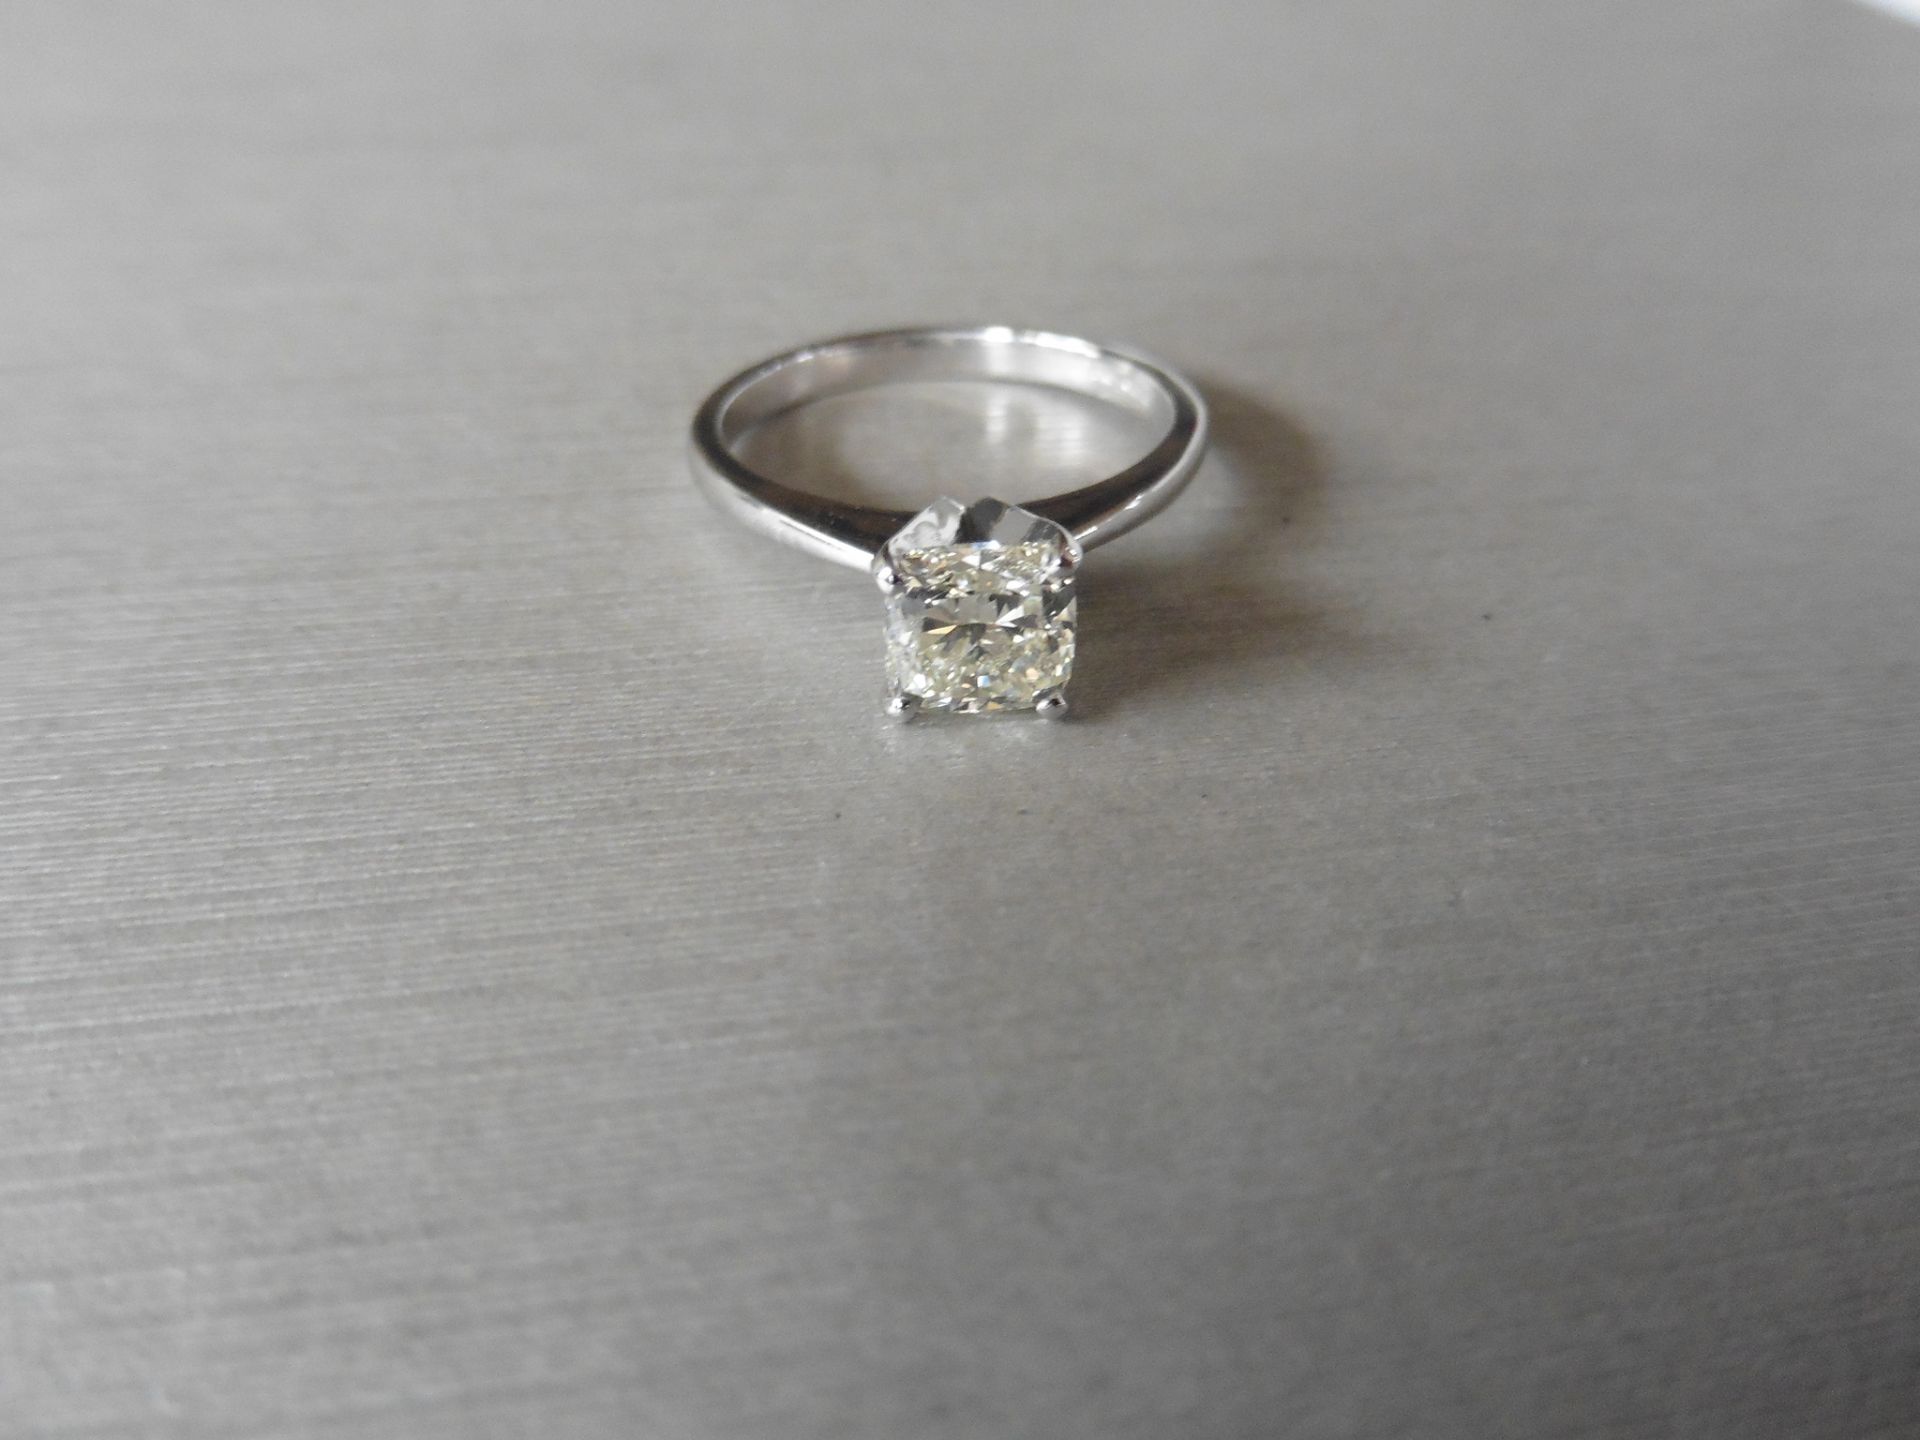 1.02ct radiant cut diamond solitaire ring set in 18ct white gold. J colour VVS2 clarity. EGL